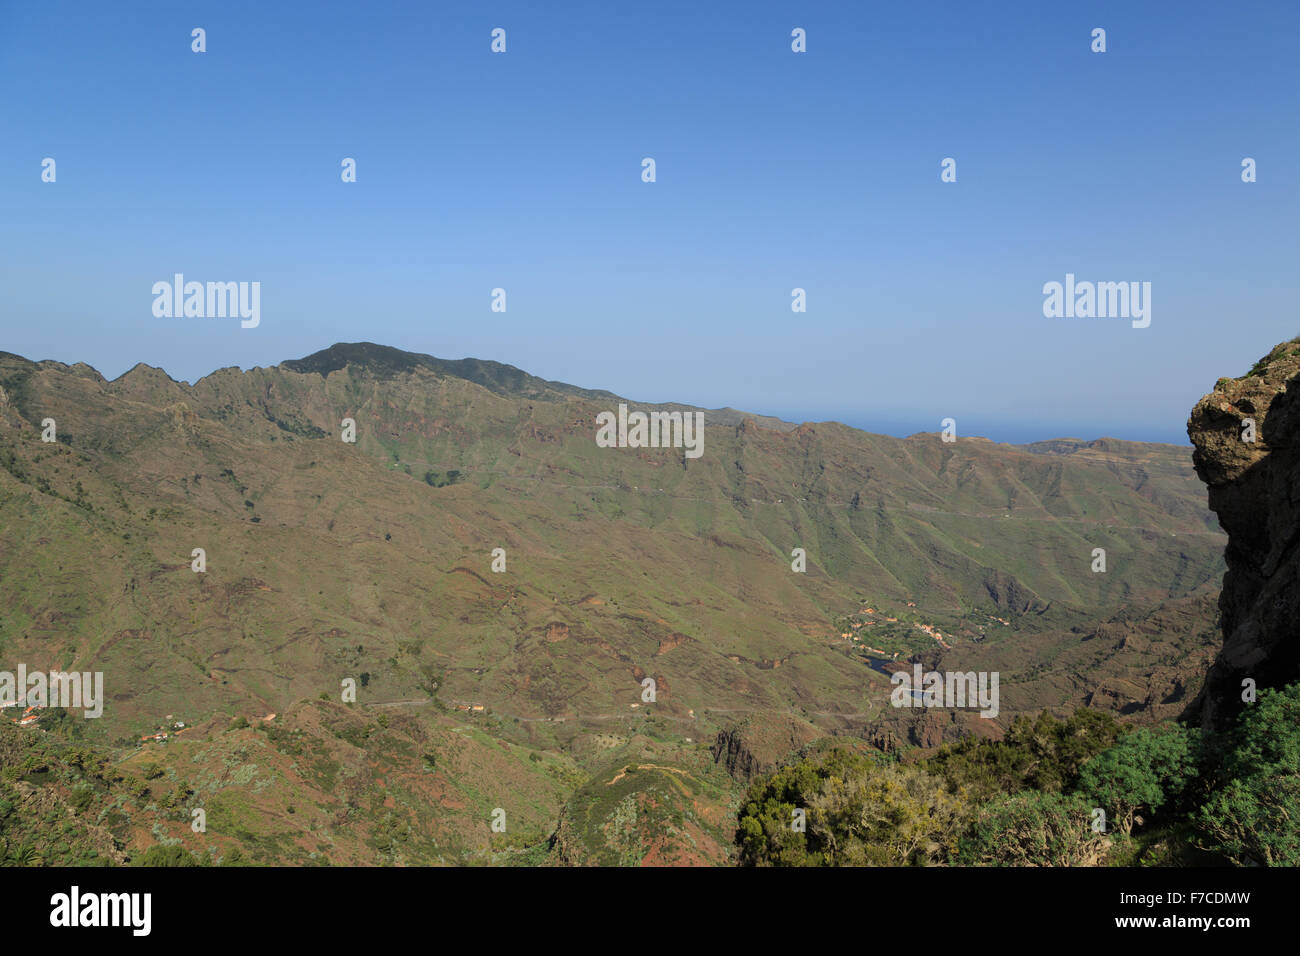 A photograph of some mountains of volcanic origin in La Gomera, Canary Islands, Spain. Stock Photo